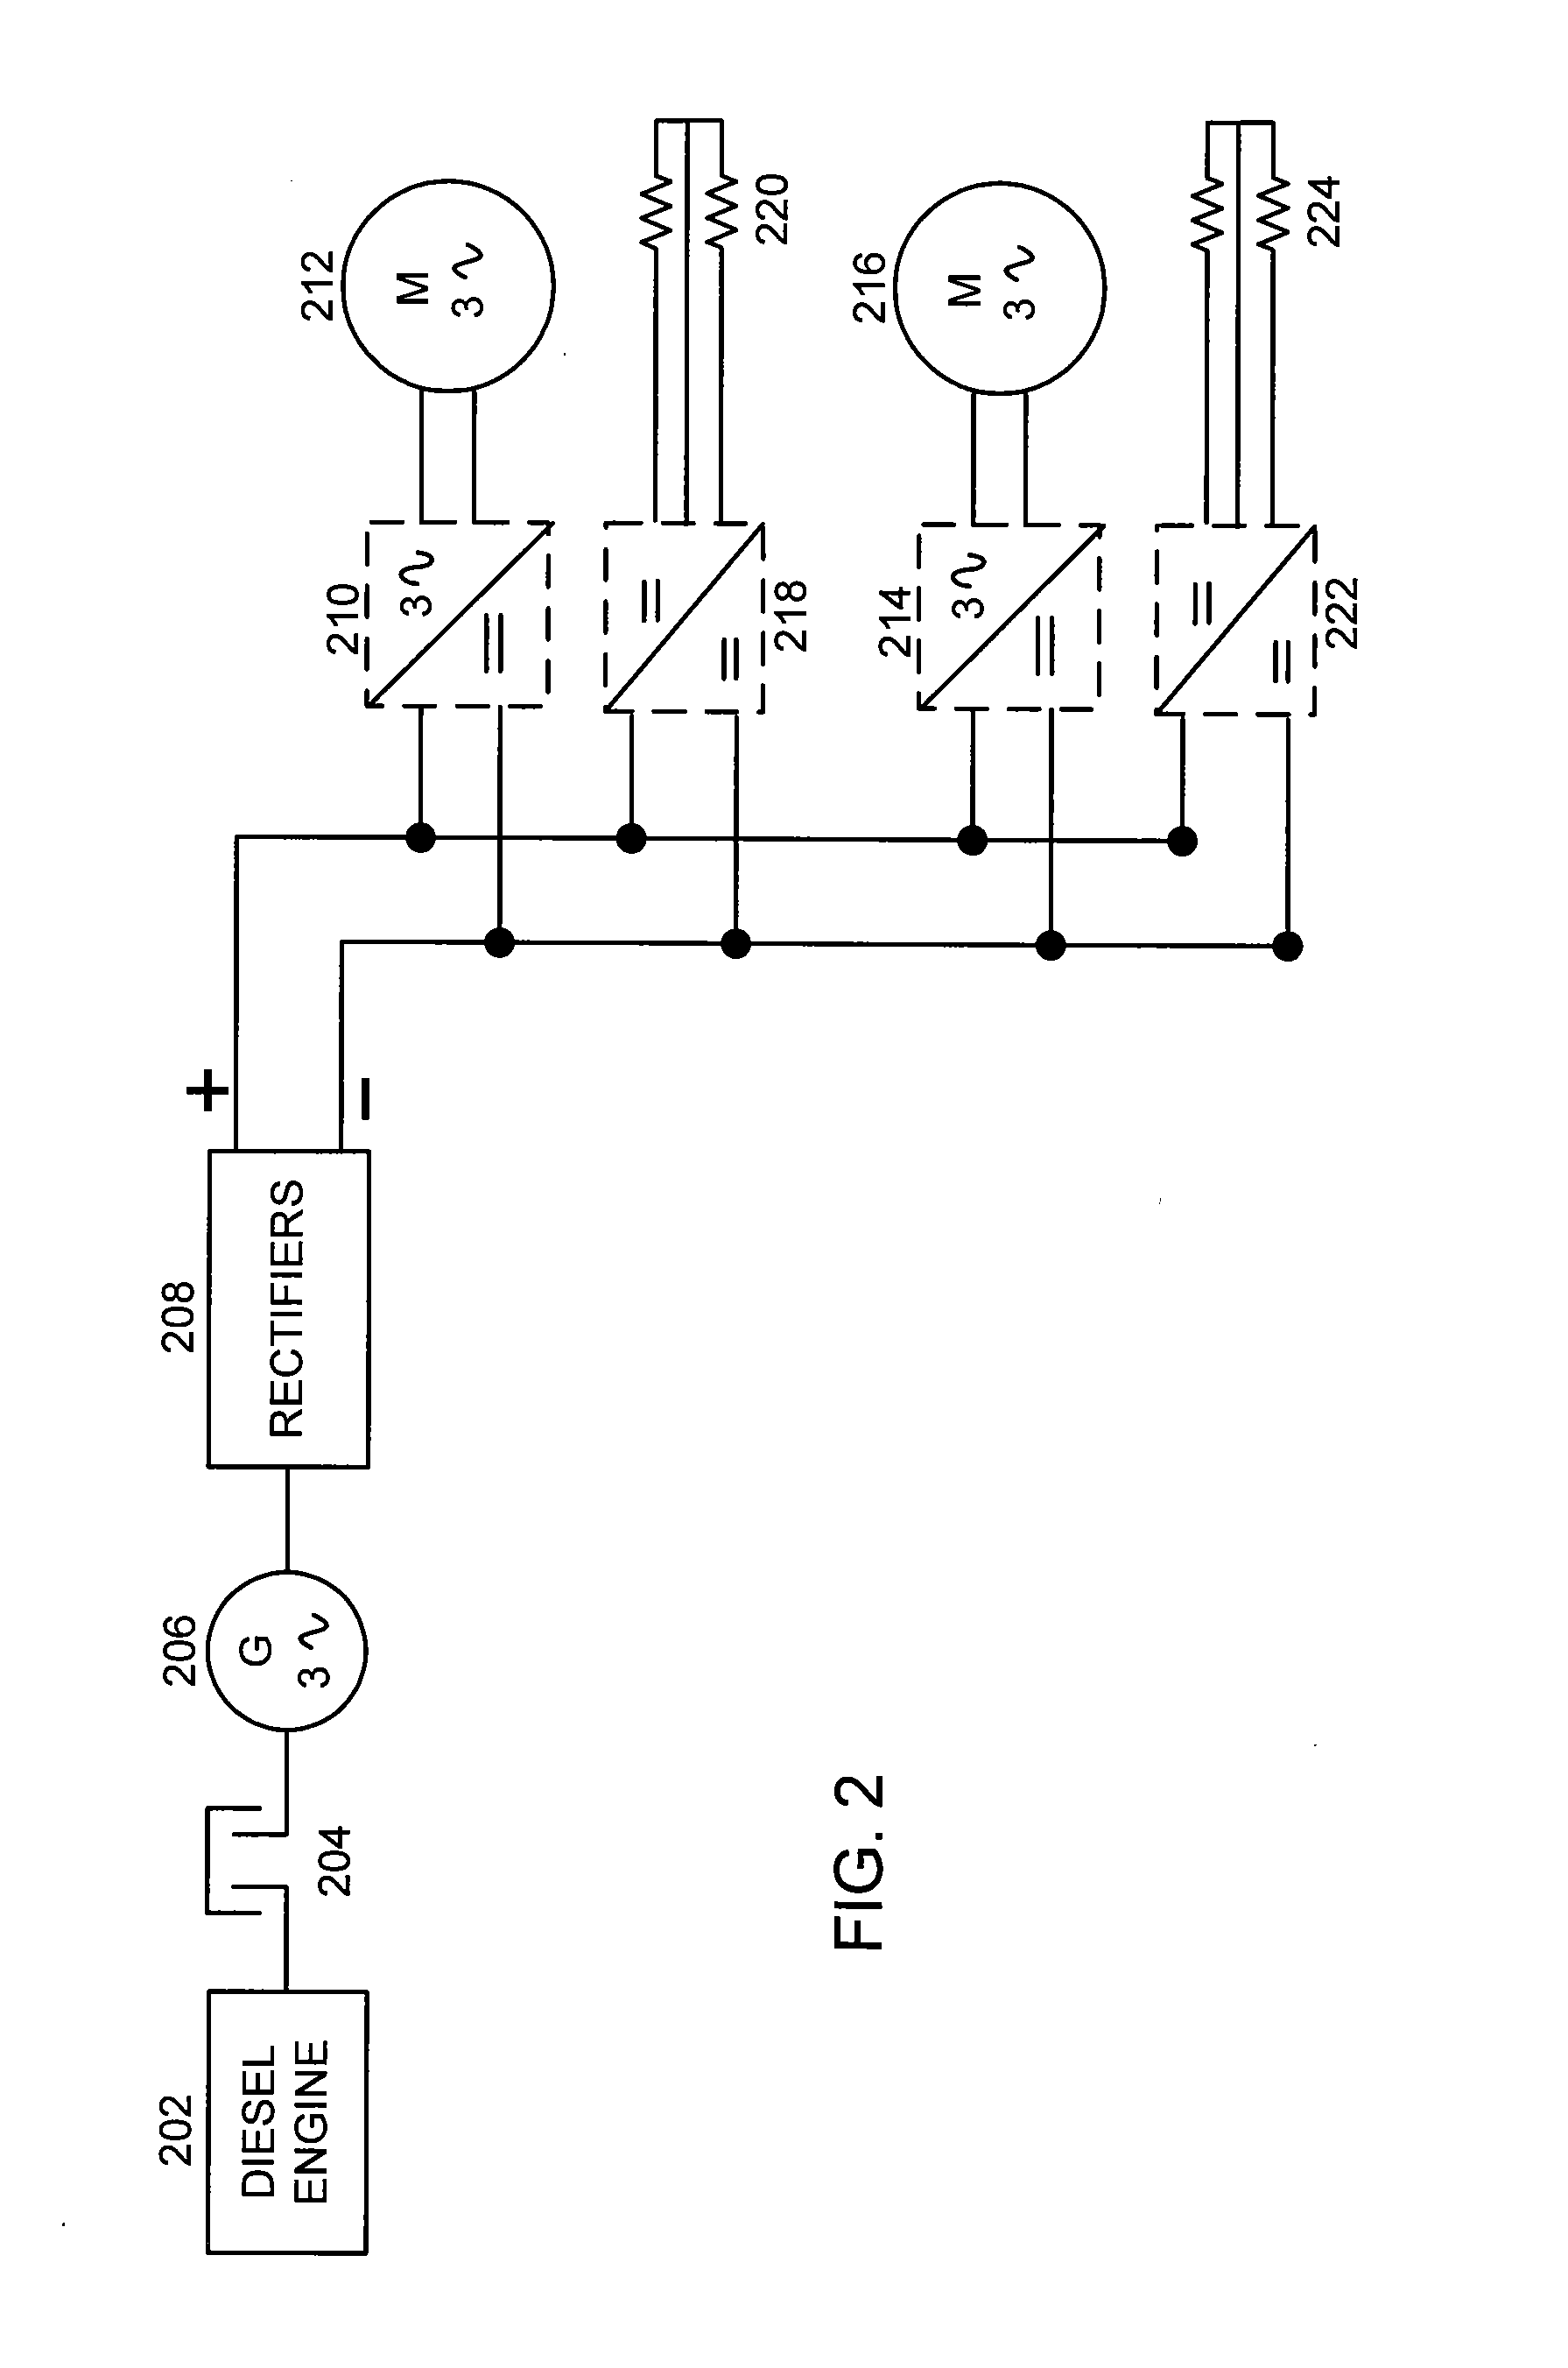 System and Method for Reinjection of Retard Energy in a Trolley-Based Electric Mining Haul Truck